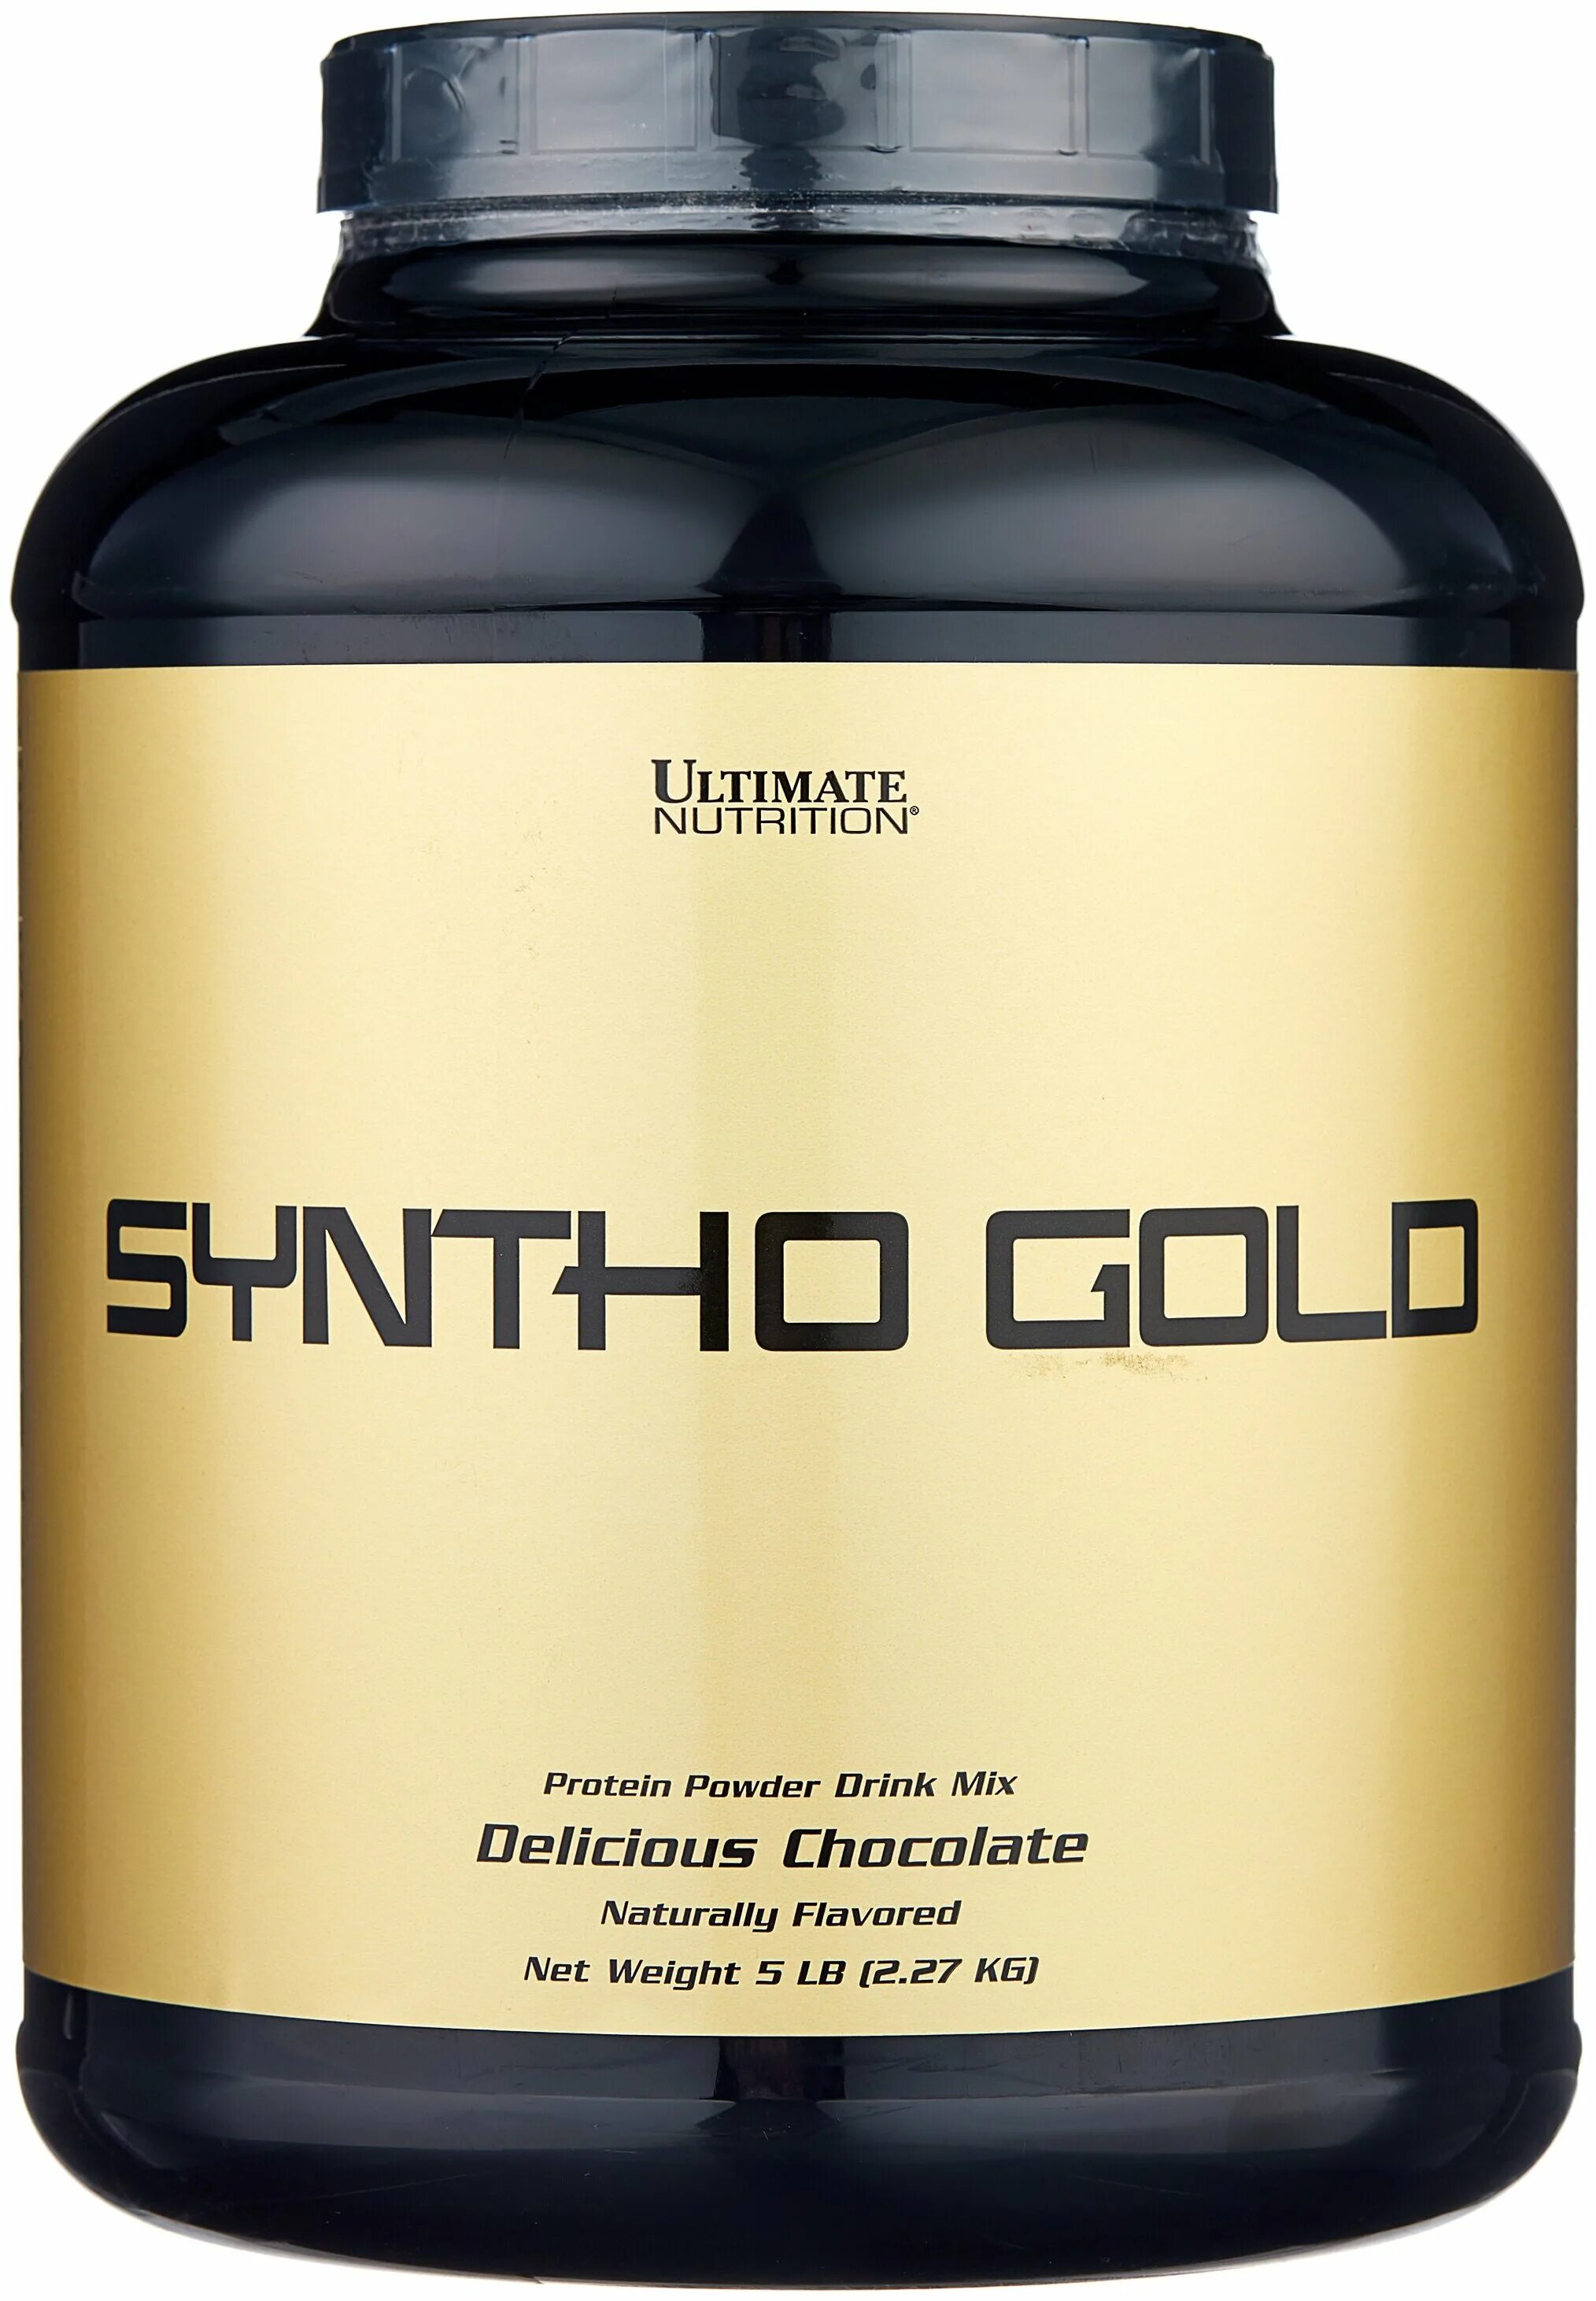 Ultimate nutrition купить. Протеин Ultimate Nutrition Syntho Gold 2270 г ваниль. Ultimate Nutrition Whey Gold. Протеин Ultimate Nutrition Whey Gold. Whey Gold изолят гидролизат.